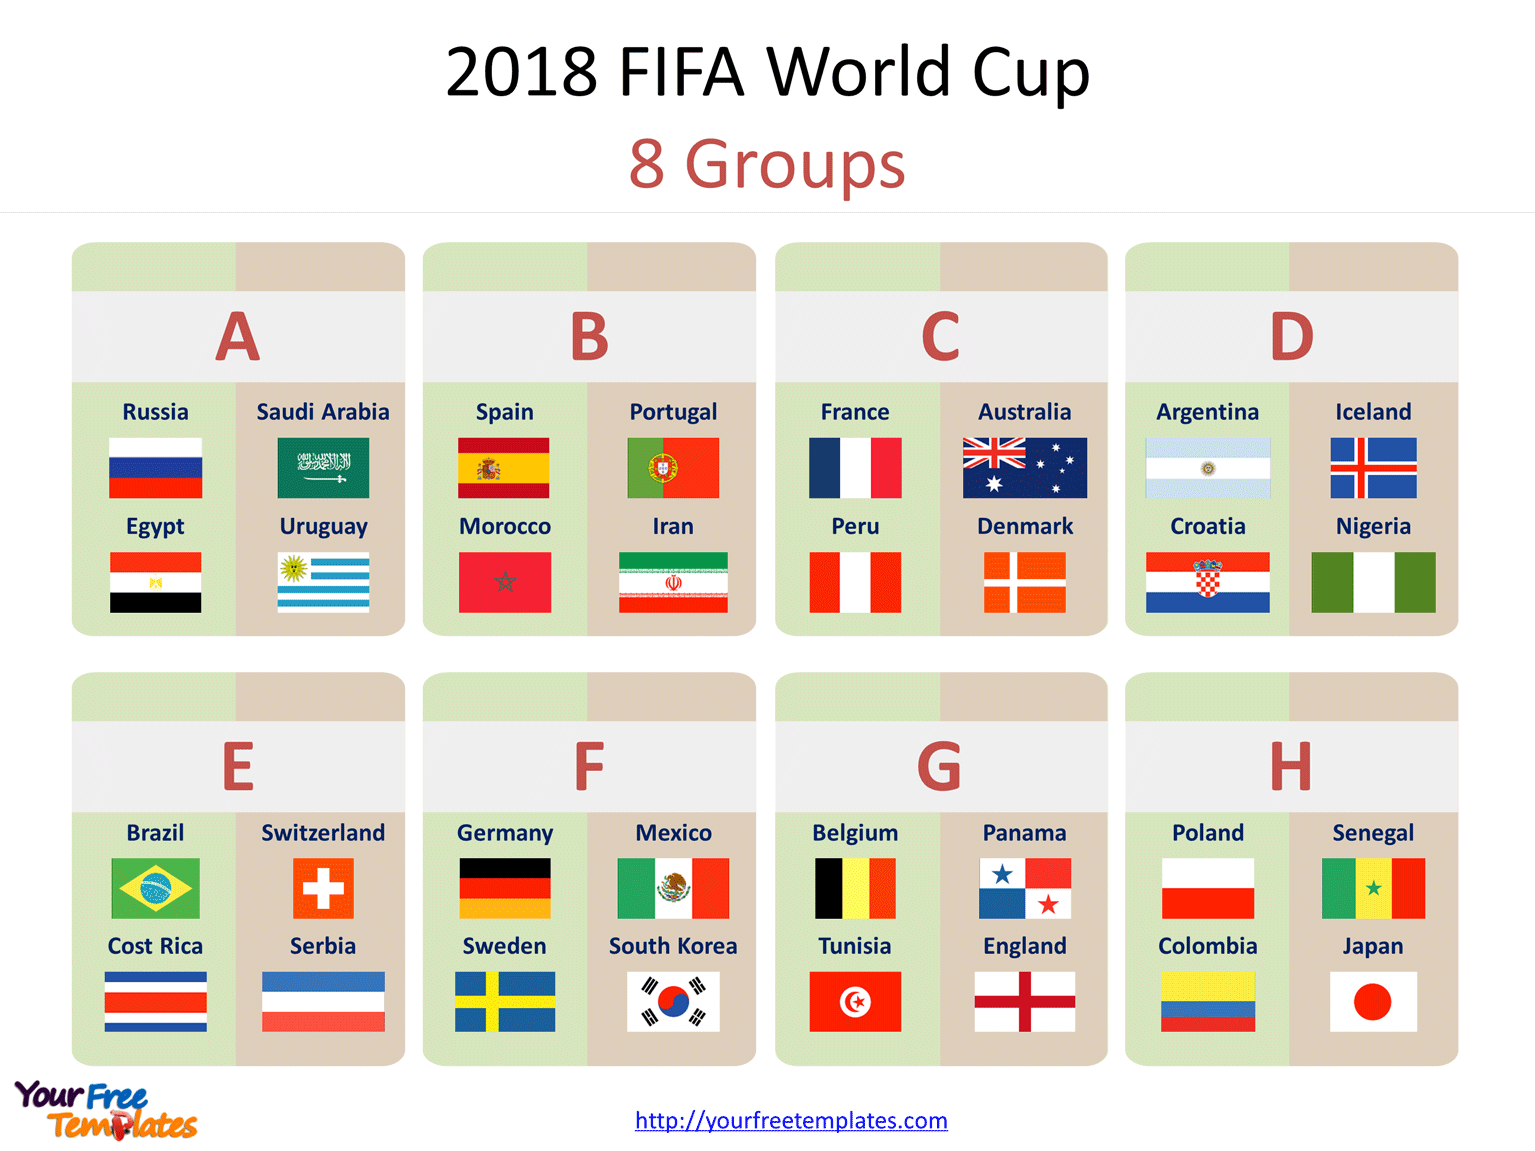 2018 FIFA World Cup with 8 groups in the 2018 FIFA World Cup PowerPoint templates